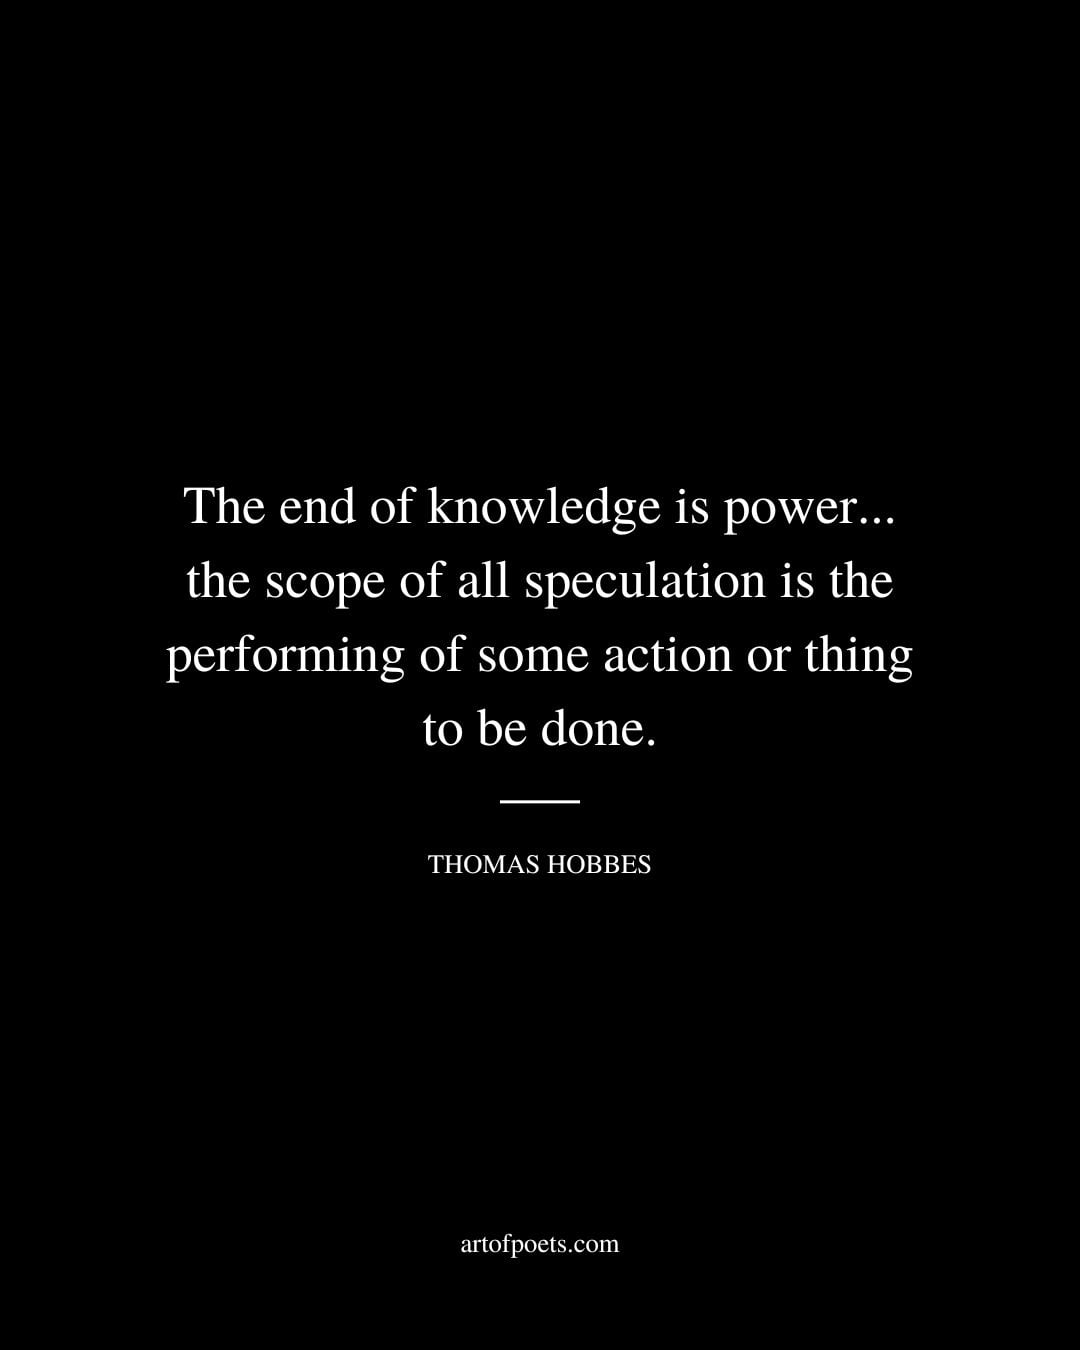 The end of knowledge is power . the scope of all speculation is the performing of some action or thing to be done